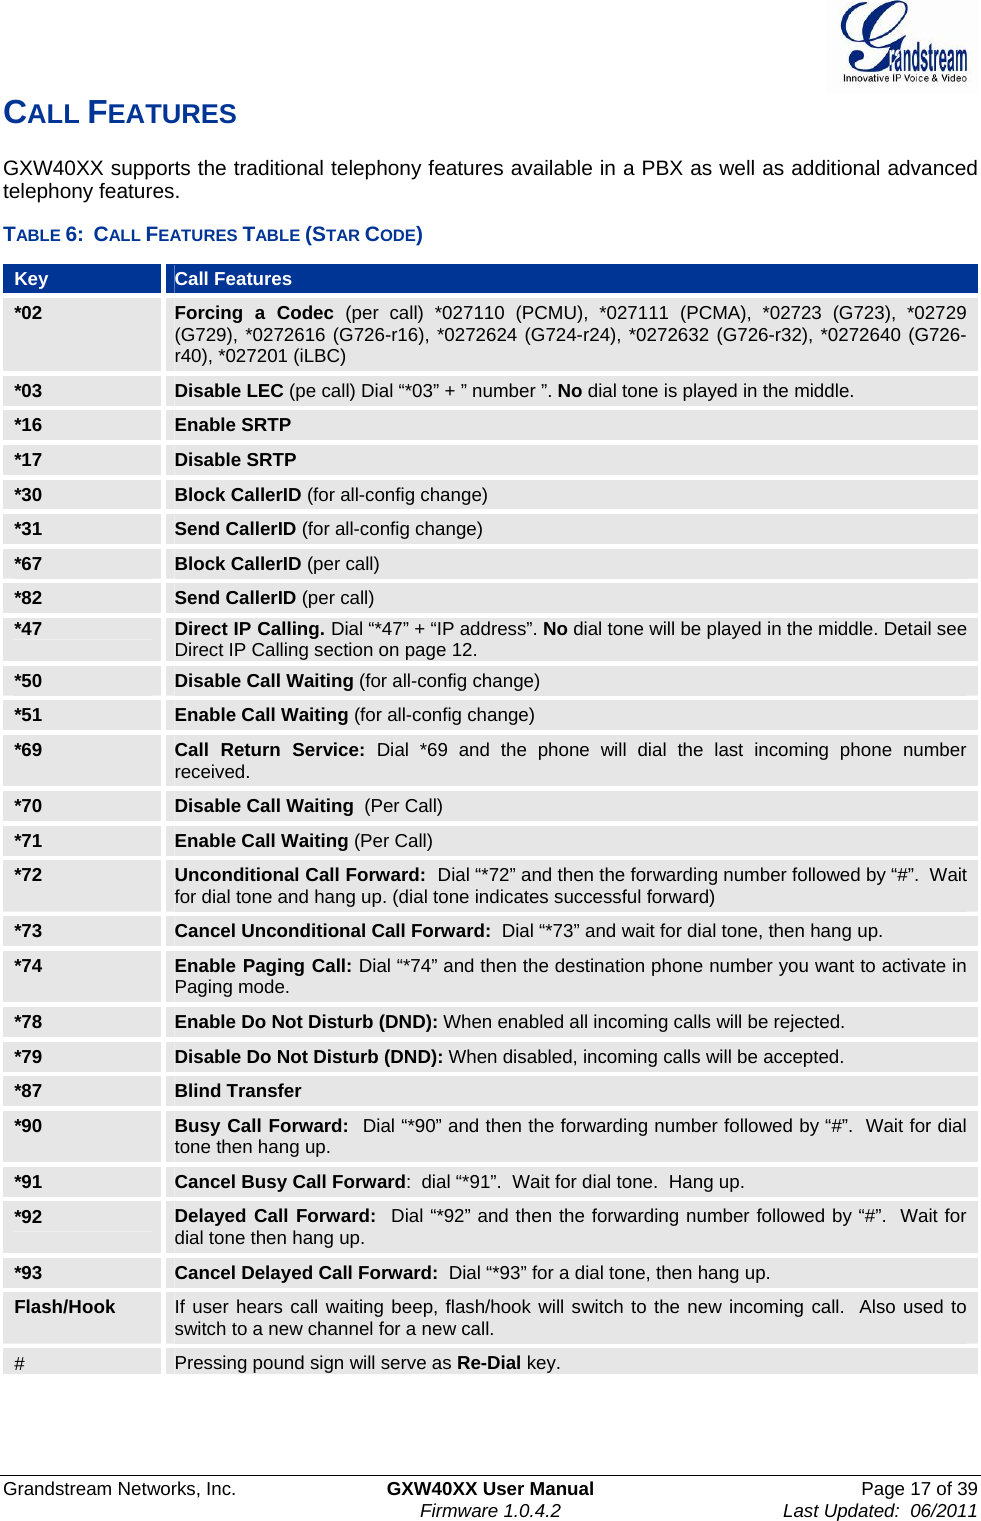  Grandstream Networks, Inc.  GXW40XX User Manual  Page 17 of 39    Firmware 1.0.4.2  Last Updated:  06/2011  CALL FEATURES GXW40XX supports the traditional telephony features available in a PBX as well as additional advanced telephony features. TABLE 6:  CALL FEATURES TABLE (STAR CODE) Key  Call Features *02  Forcing a Codec (per call) *027110 (PCMU), *027111 (PCMA), *02723 (G723), *02729 (G729), *0272616 (G726-r16), *0272624 (G724-r24), *0272632 (G726-r32), *0272640 (G726-r40), *027201 (iLBC) *03  Disable LEC (pe call) Dial “*03” + ” number ”. No dial tone is played in the middle. *16  Enable SRTP *17  Disable SRTP *30  Block CallerID (for all-config change) *31  Send CallerID (for all-config change)*67  Block CallerID (per call) *82  Send CallerID (per call) *47  Direct IP Calling. Dial “*47” + “IP address”. No dial tone will be played in the middle. Detail see Direct IP Calling section on page 12. *50  Disable Call Waiting (for all-config change) *51  Enable Call Waiting (for all-config change) *69  Call Return Service: Dial *69 and the phone will dial the last incoming phone number received. *70  Disable Call Waiting  (Per Call) *71  Enable Call Waiting (Per Call) *72  Unconditional Call Forward:  Dial “*72” and then the forwarding number followed by “#”.  Wait for dial tone and hang up. (dial tone indicates successful forward) *73  Cancel Unconditional Call Forward:  Dial “*73” and wait for dial tone, then hang up. *74  Enable Paging Call: Dial “*74” and then the destination phone number you want to activate in Paging mode. *78  Enable Do Not Disturb (DND): When enabled all incoming calls will be rejected. *79  Disable Do Not Disturb (DND): When disabled, incoming calls will be accepted. *87  Blind Transfer *90  Busy Call Forward:  Dial “*90” and then the forwarding number followed by “#”.  Wait for dial tone then hang up. *91  Cancel Busy Call Forward:  dial “*91”.  Wait for dial tone.  Hang up. *92  Delayed Call Forward:  Dial “*92” and then the forwarding number followed by “#”.  Wait for dial tone then hang up. *93  Cancel Delayed Call Forward:  Dial “*93” for a dial tone, then hang up. Flash/Hook  If user hears call waiting beep, flash/hook will switch to the new incoming call.  Also used to switch to a new channel for a new call. #  Pressing pound sign will serve as Re-Dial key.  